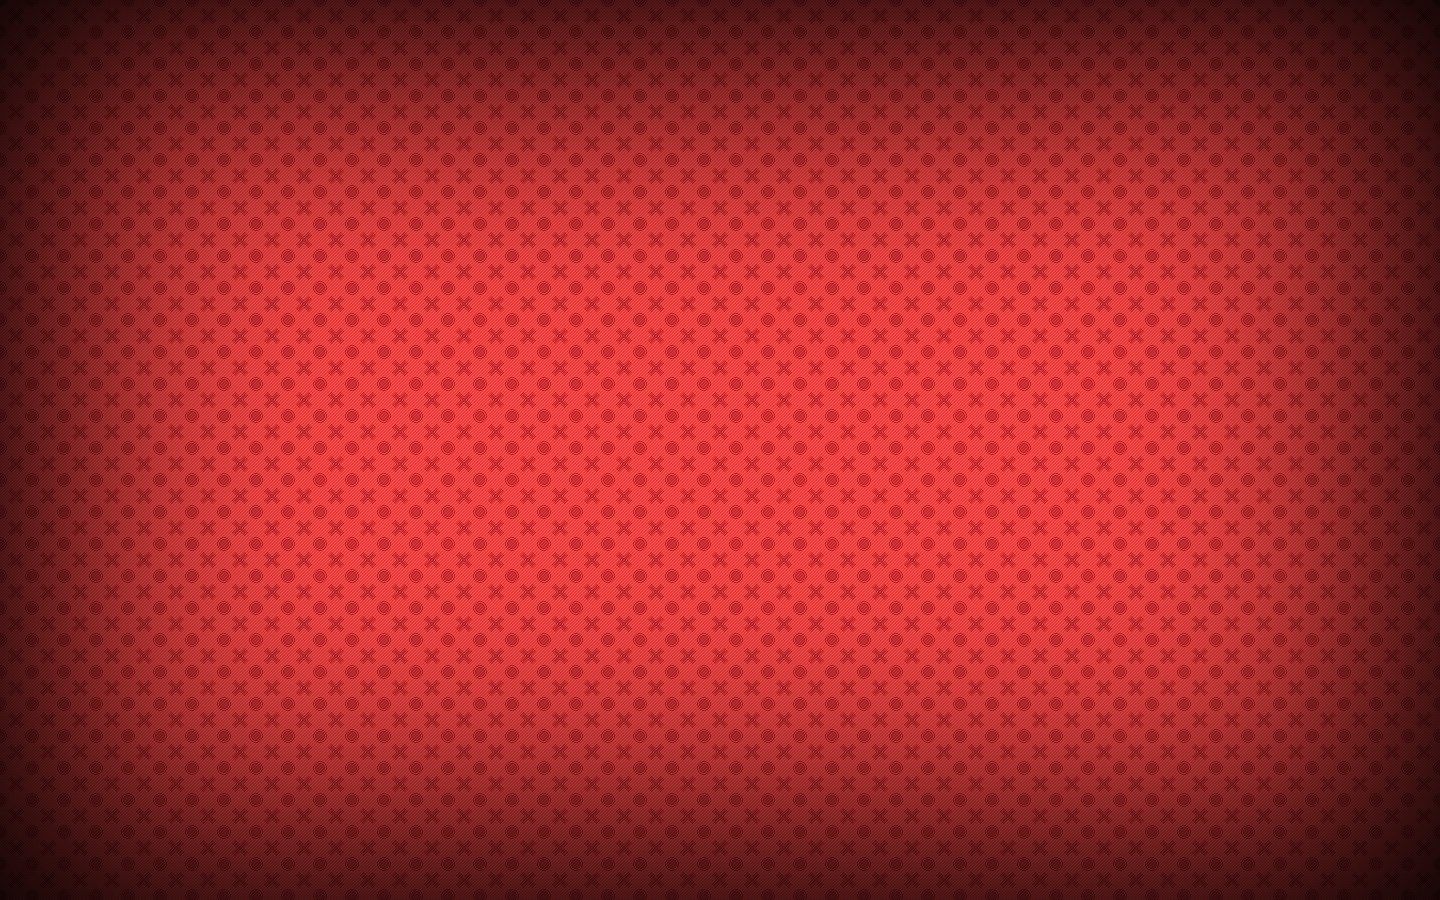 General 1440x900 pattern simple background red background texture red digital art